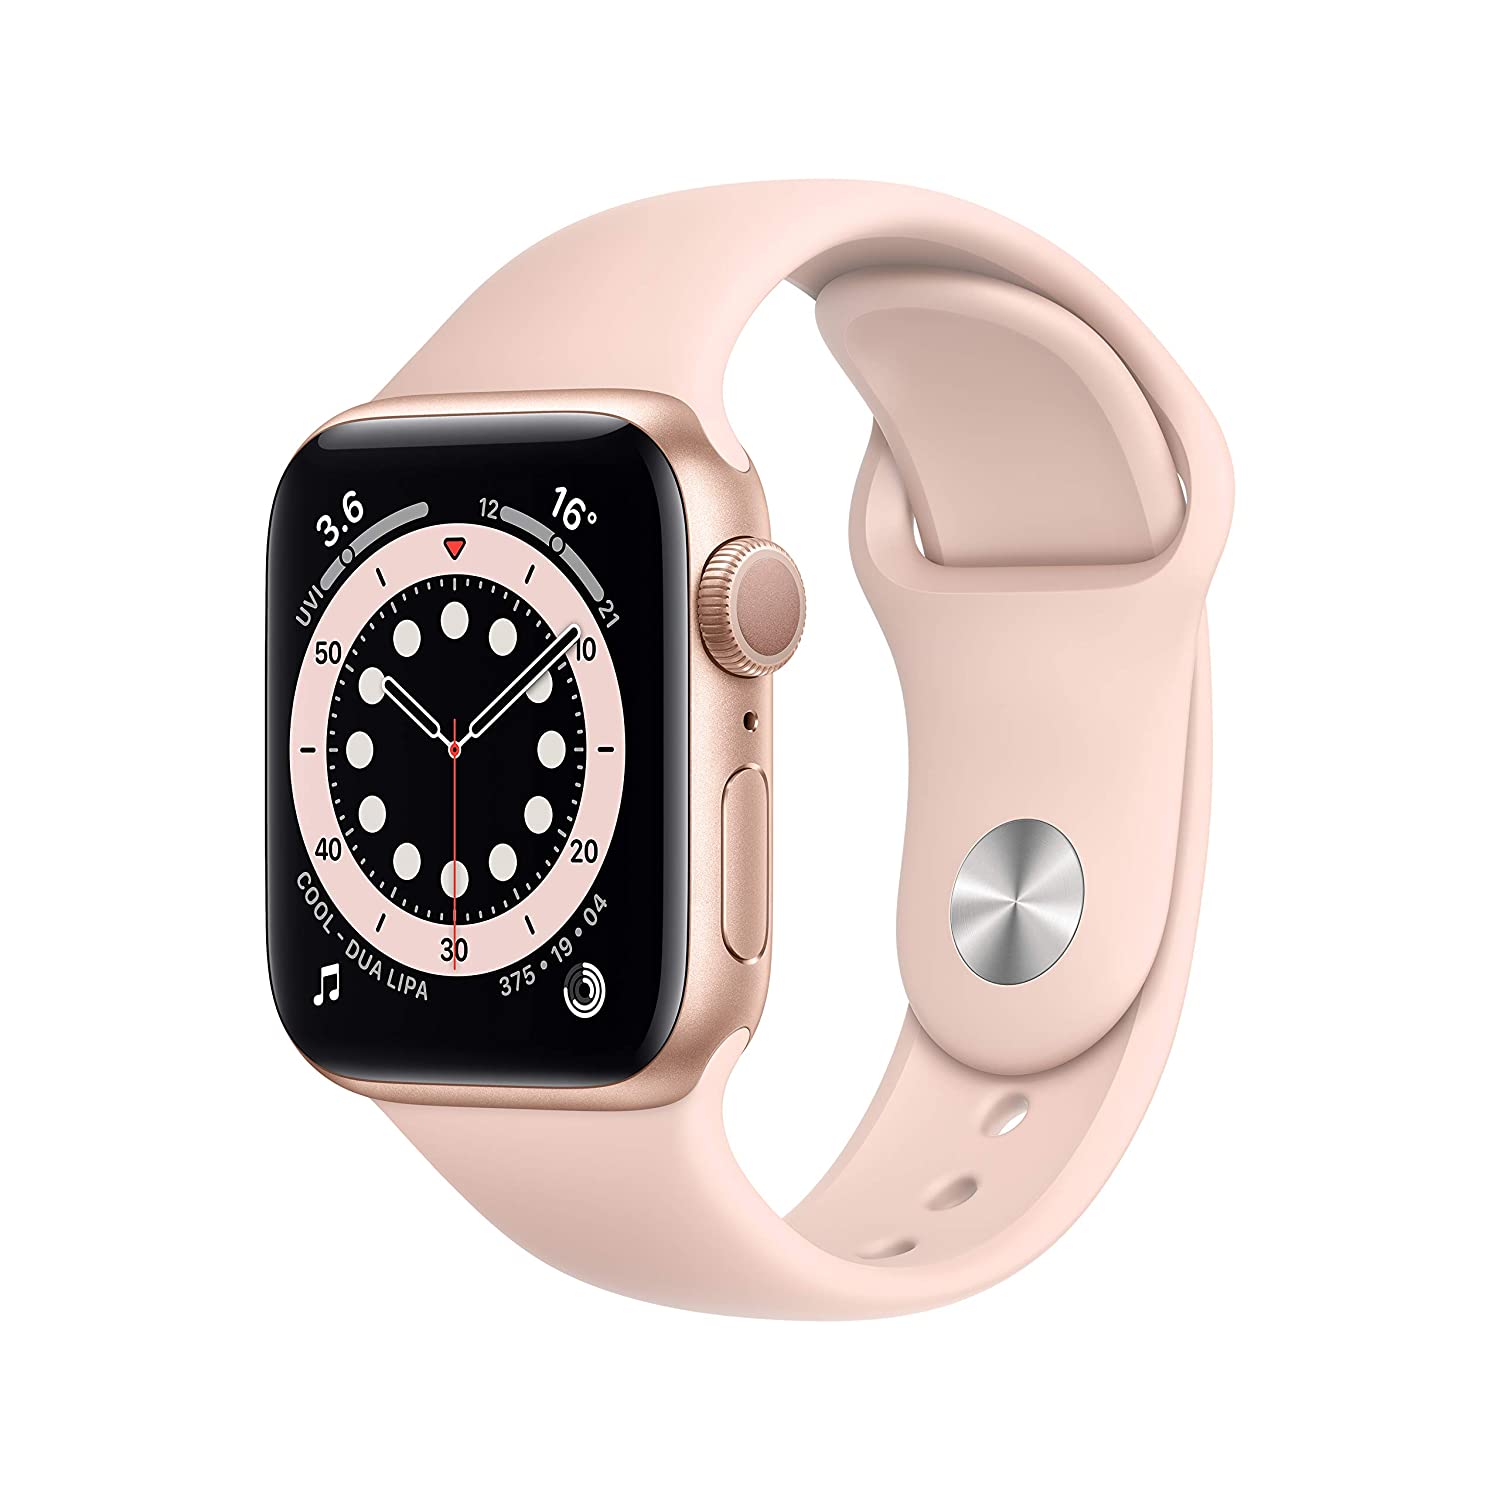 New Apple Watch Series 6 (GPS, 40mm) - Gold Aluminium Case With Pink And Sport Band